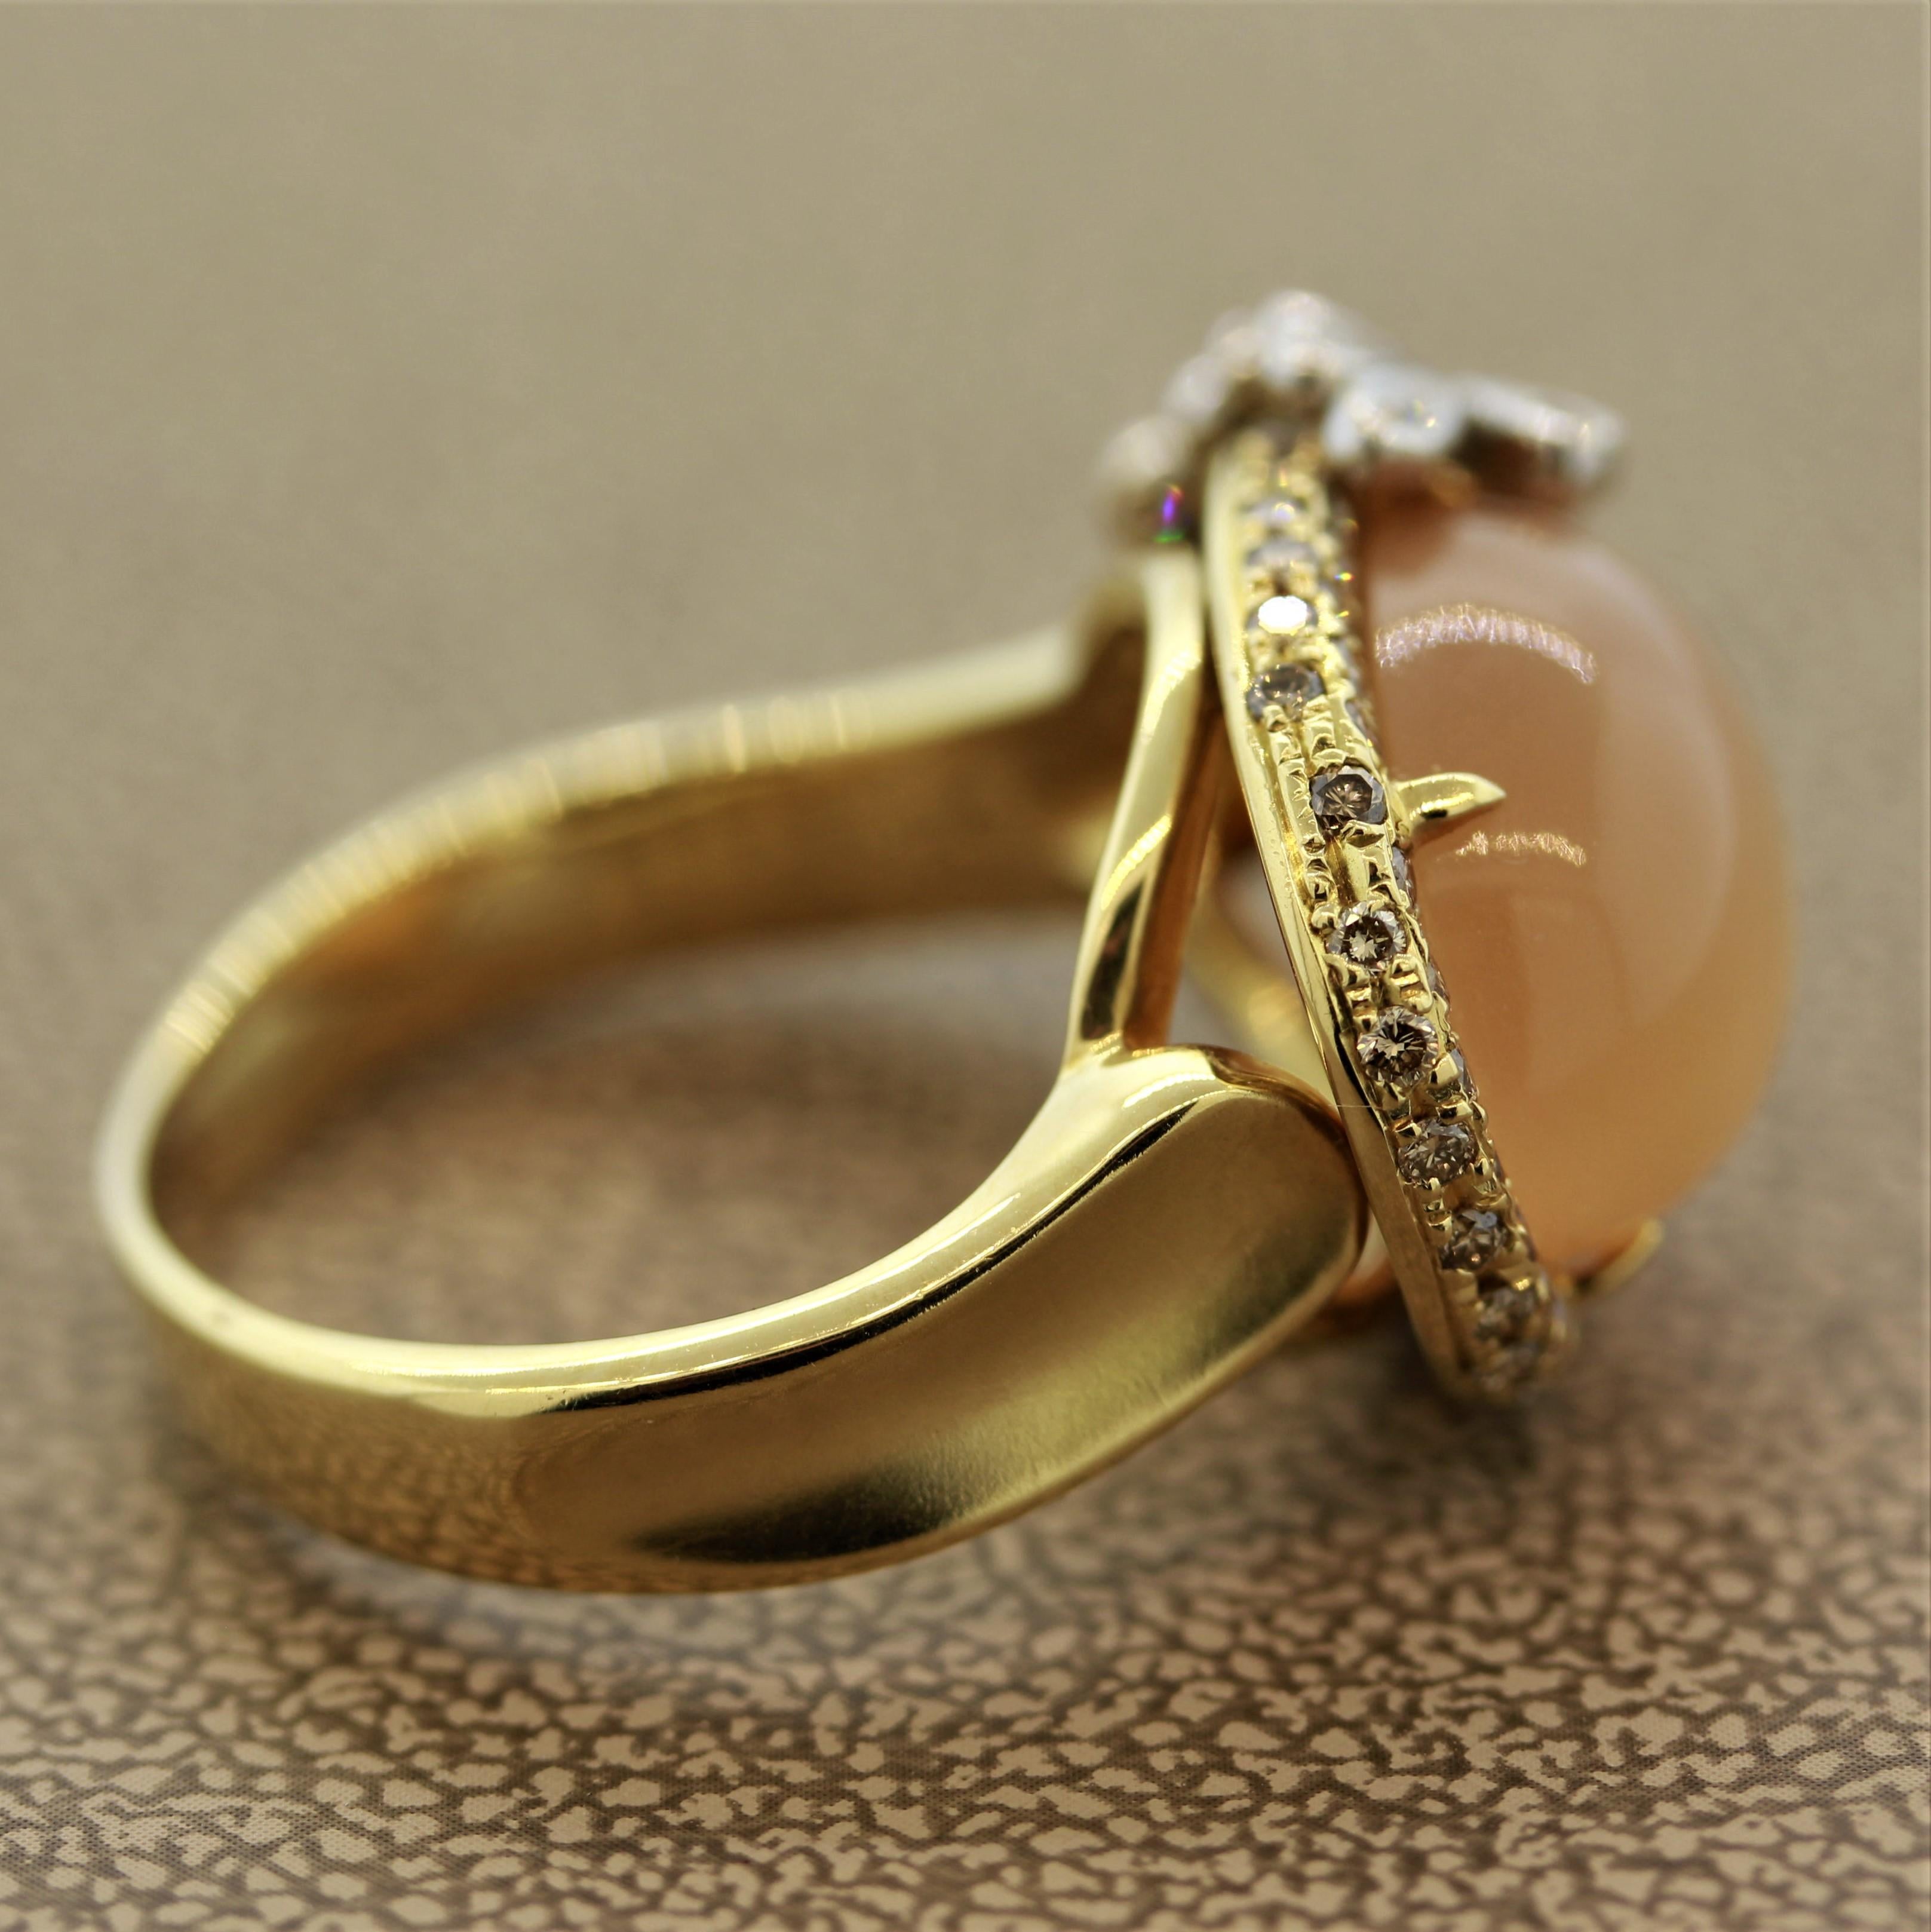 Cabochon Cat’s Eye Moonstone Diamond Gold Ring For Sale